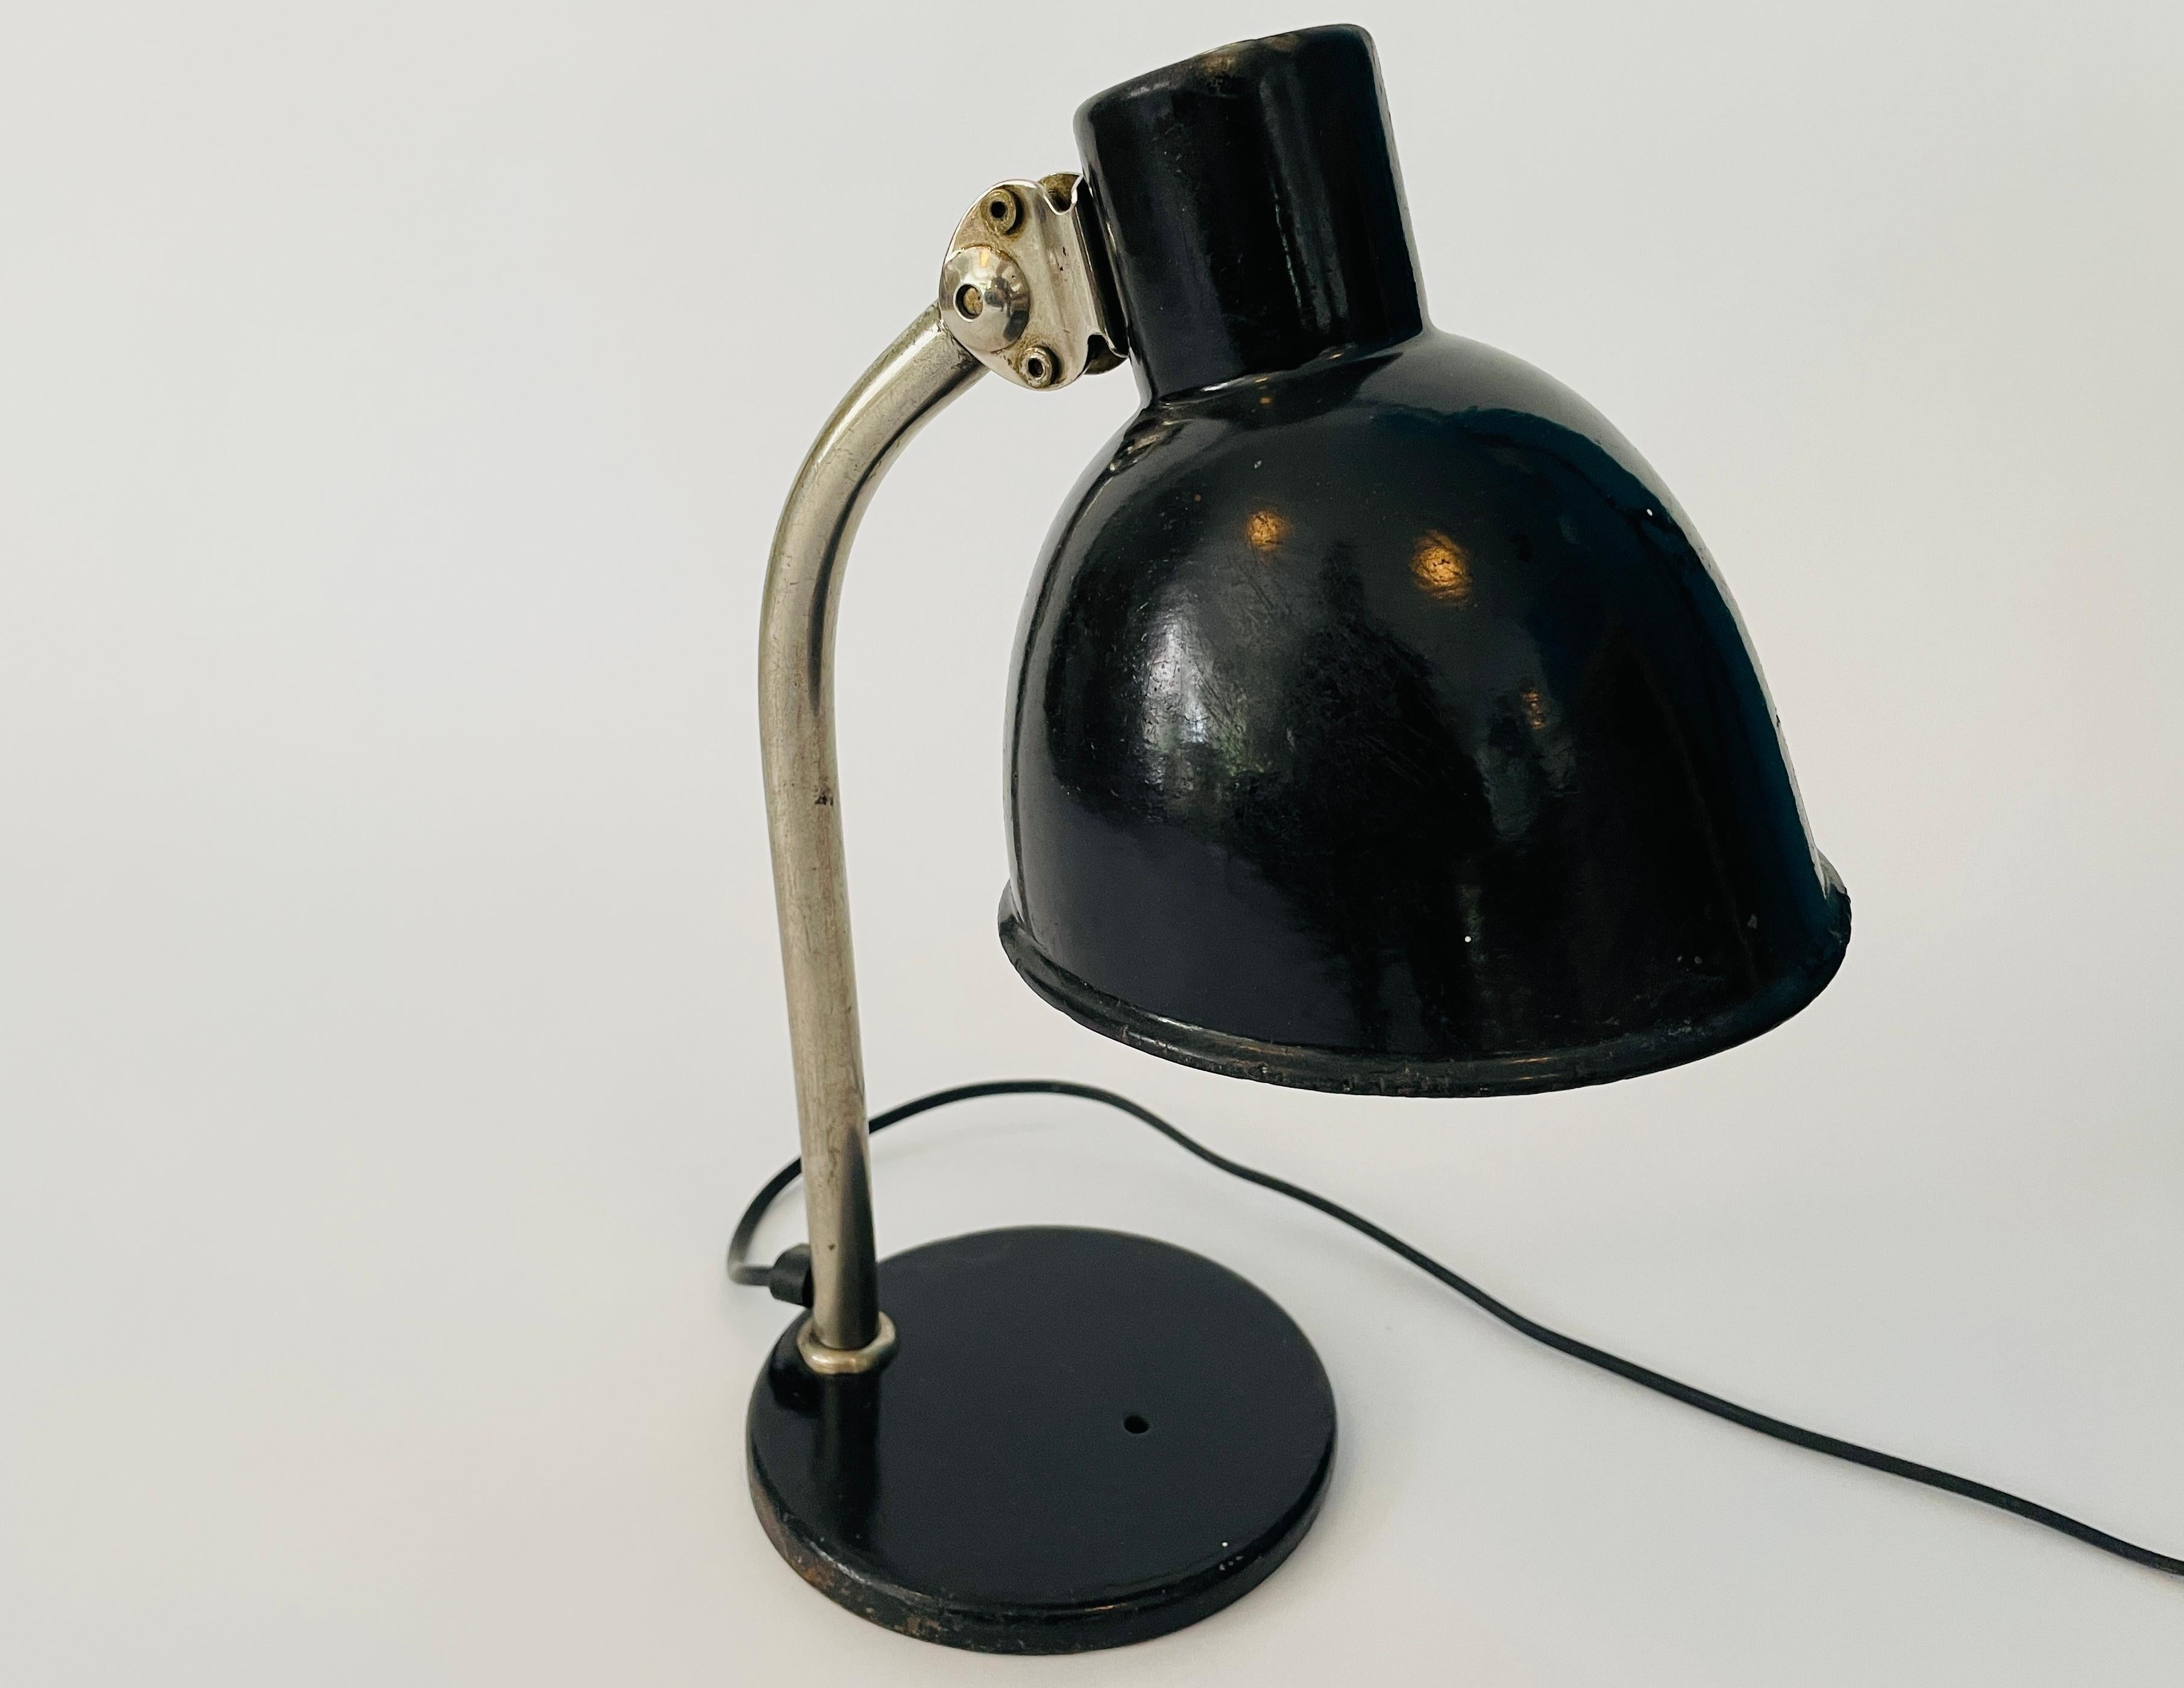 20th Century Early Paavo Tynell Desk Lamp, Model 5307, TAITO Finland 1930's For Sale